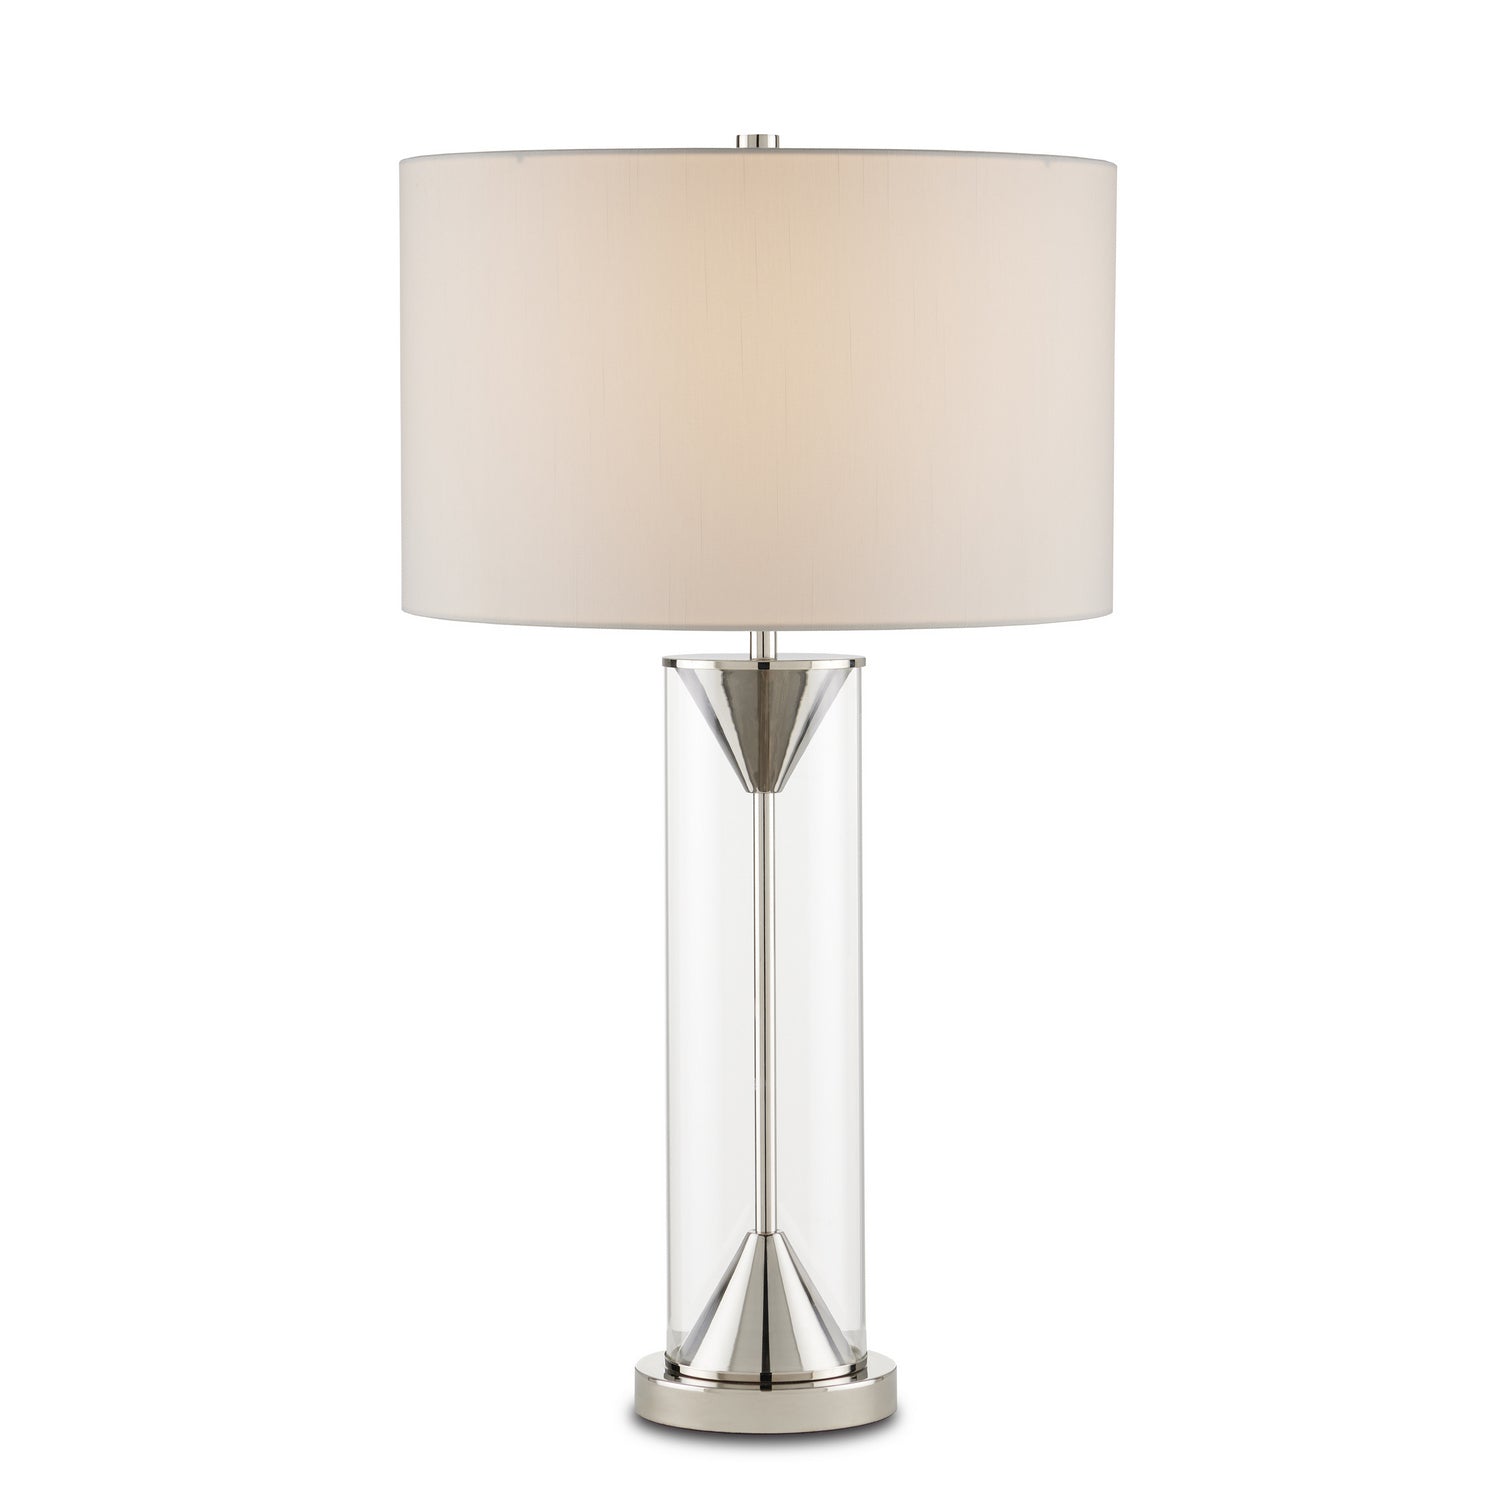 Currey and Company - 6000-0831 - One Light Table Lamp - Piers - Polished Nickel/Clear